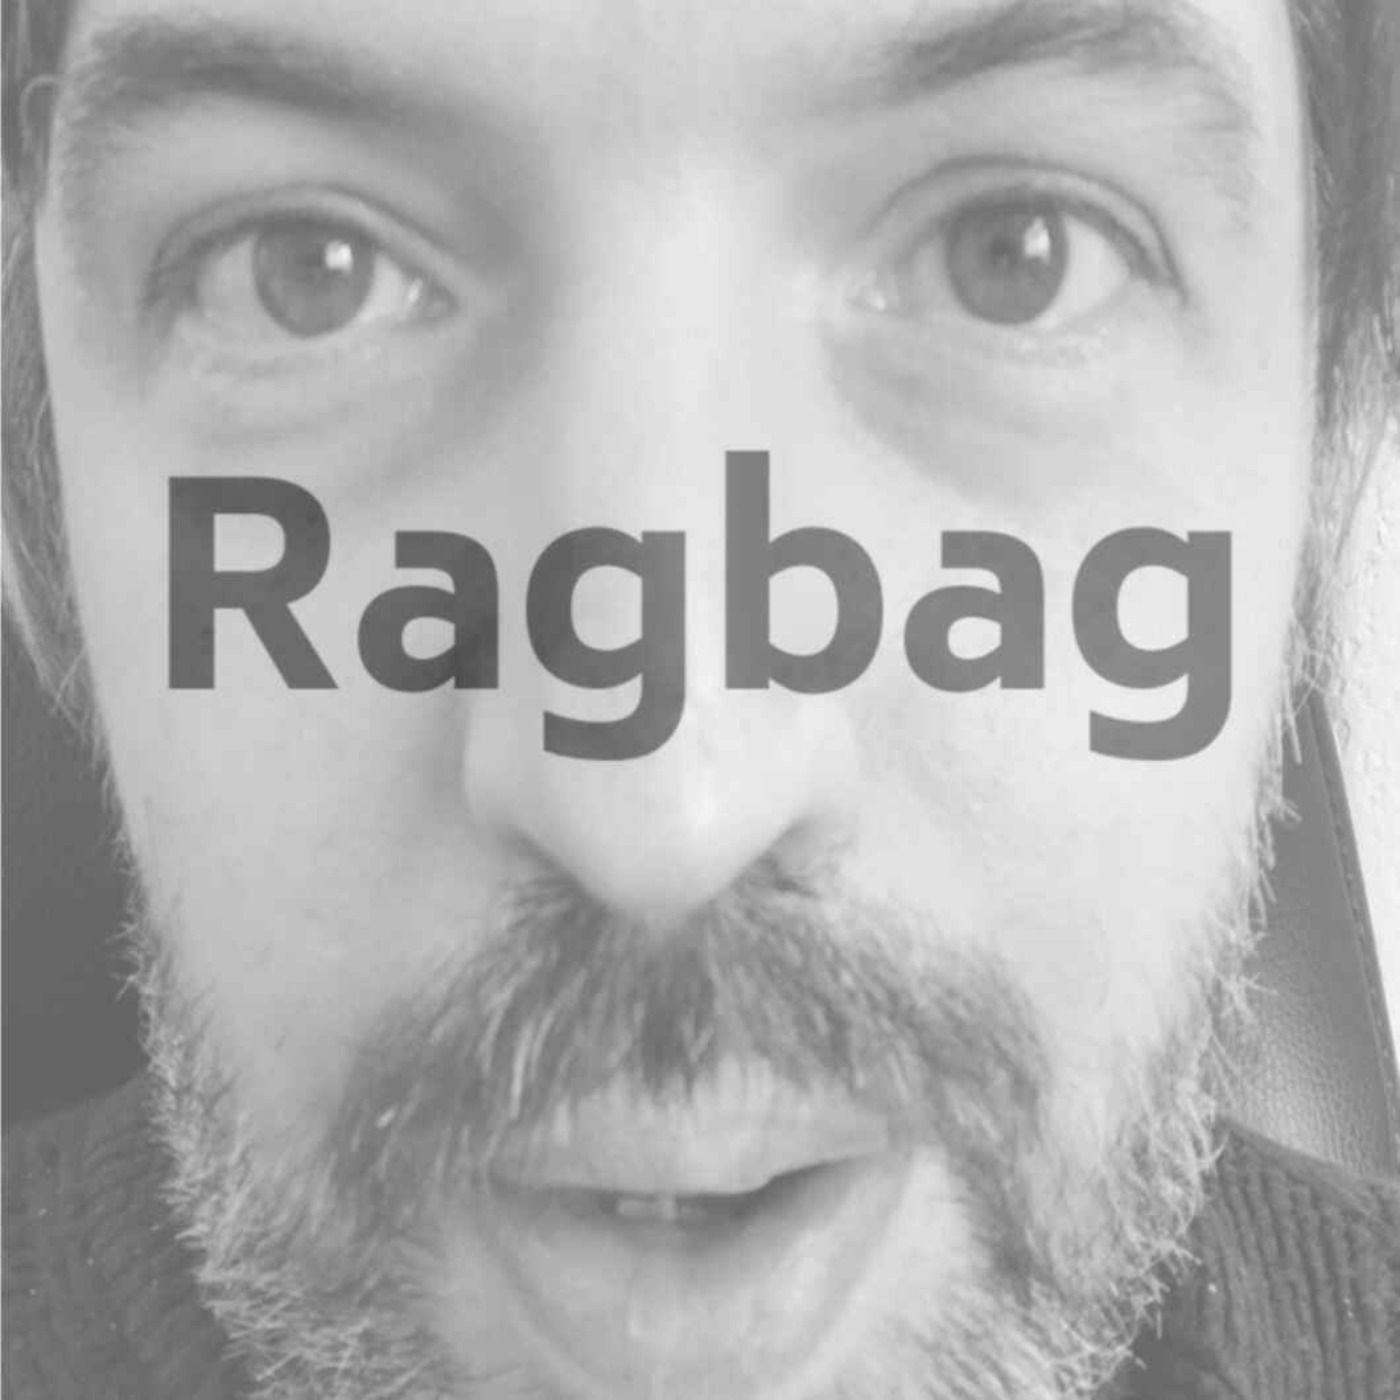 Ep96: Ragbag's Fourth Wall Part 1